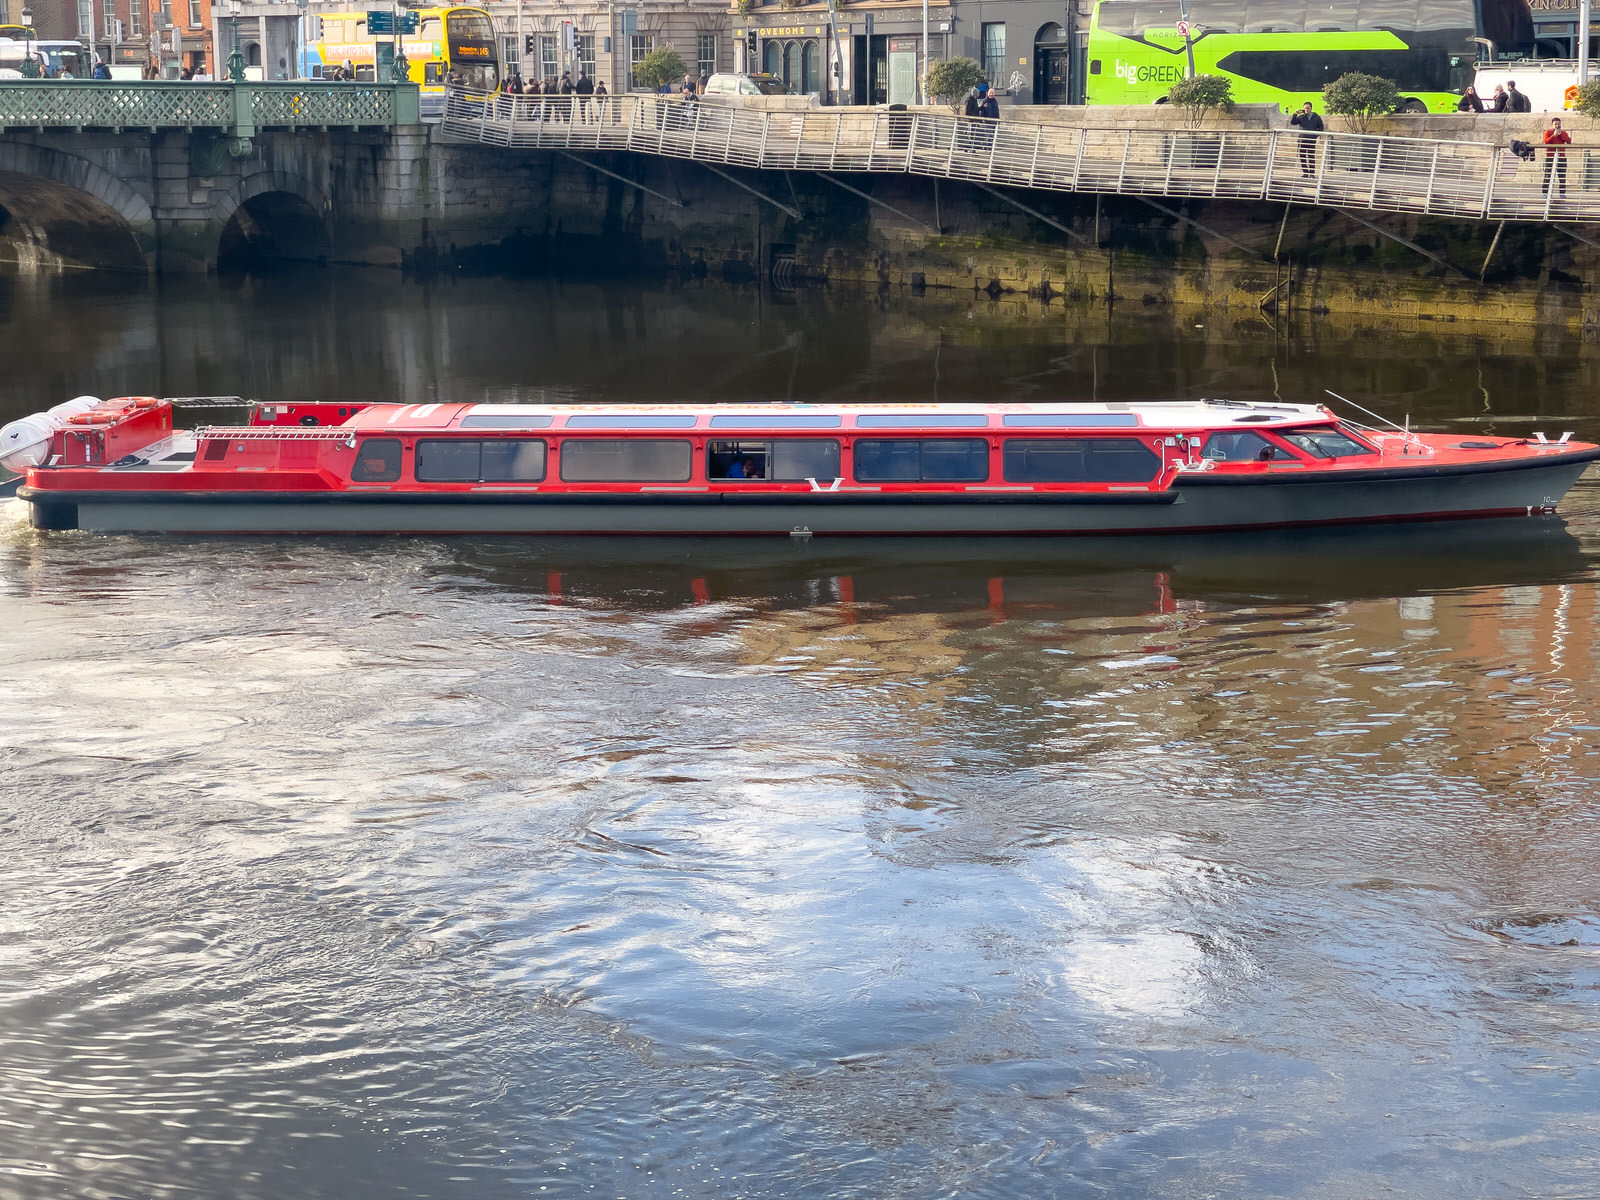 I HAD NOTHING BETTER TO DO [SO I PHOTOGRAPHED THE SPIRIT OF THE DOCKLANDS TURNING ON THE RIVER LIFFEY]-229462-1